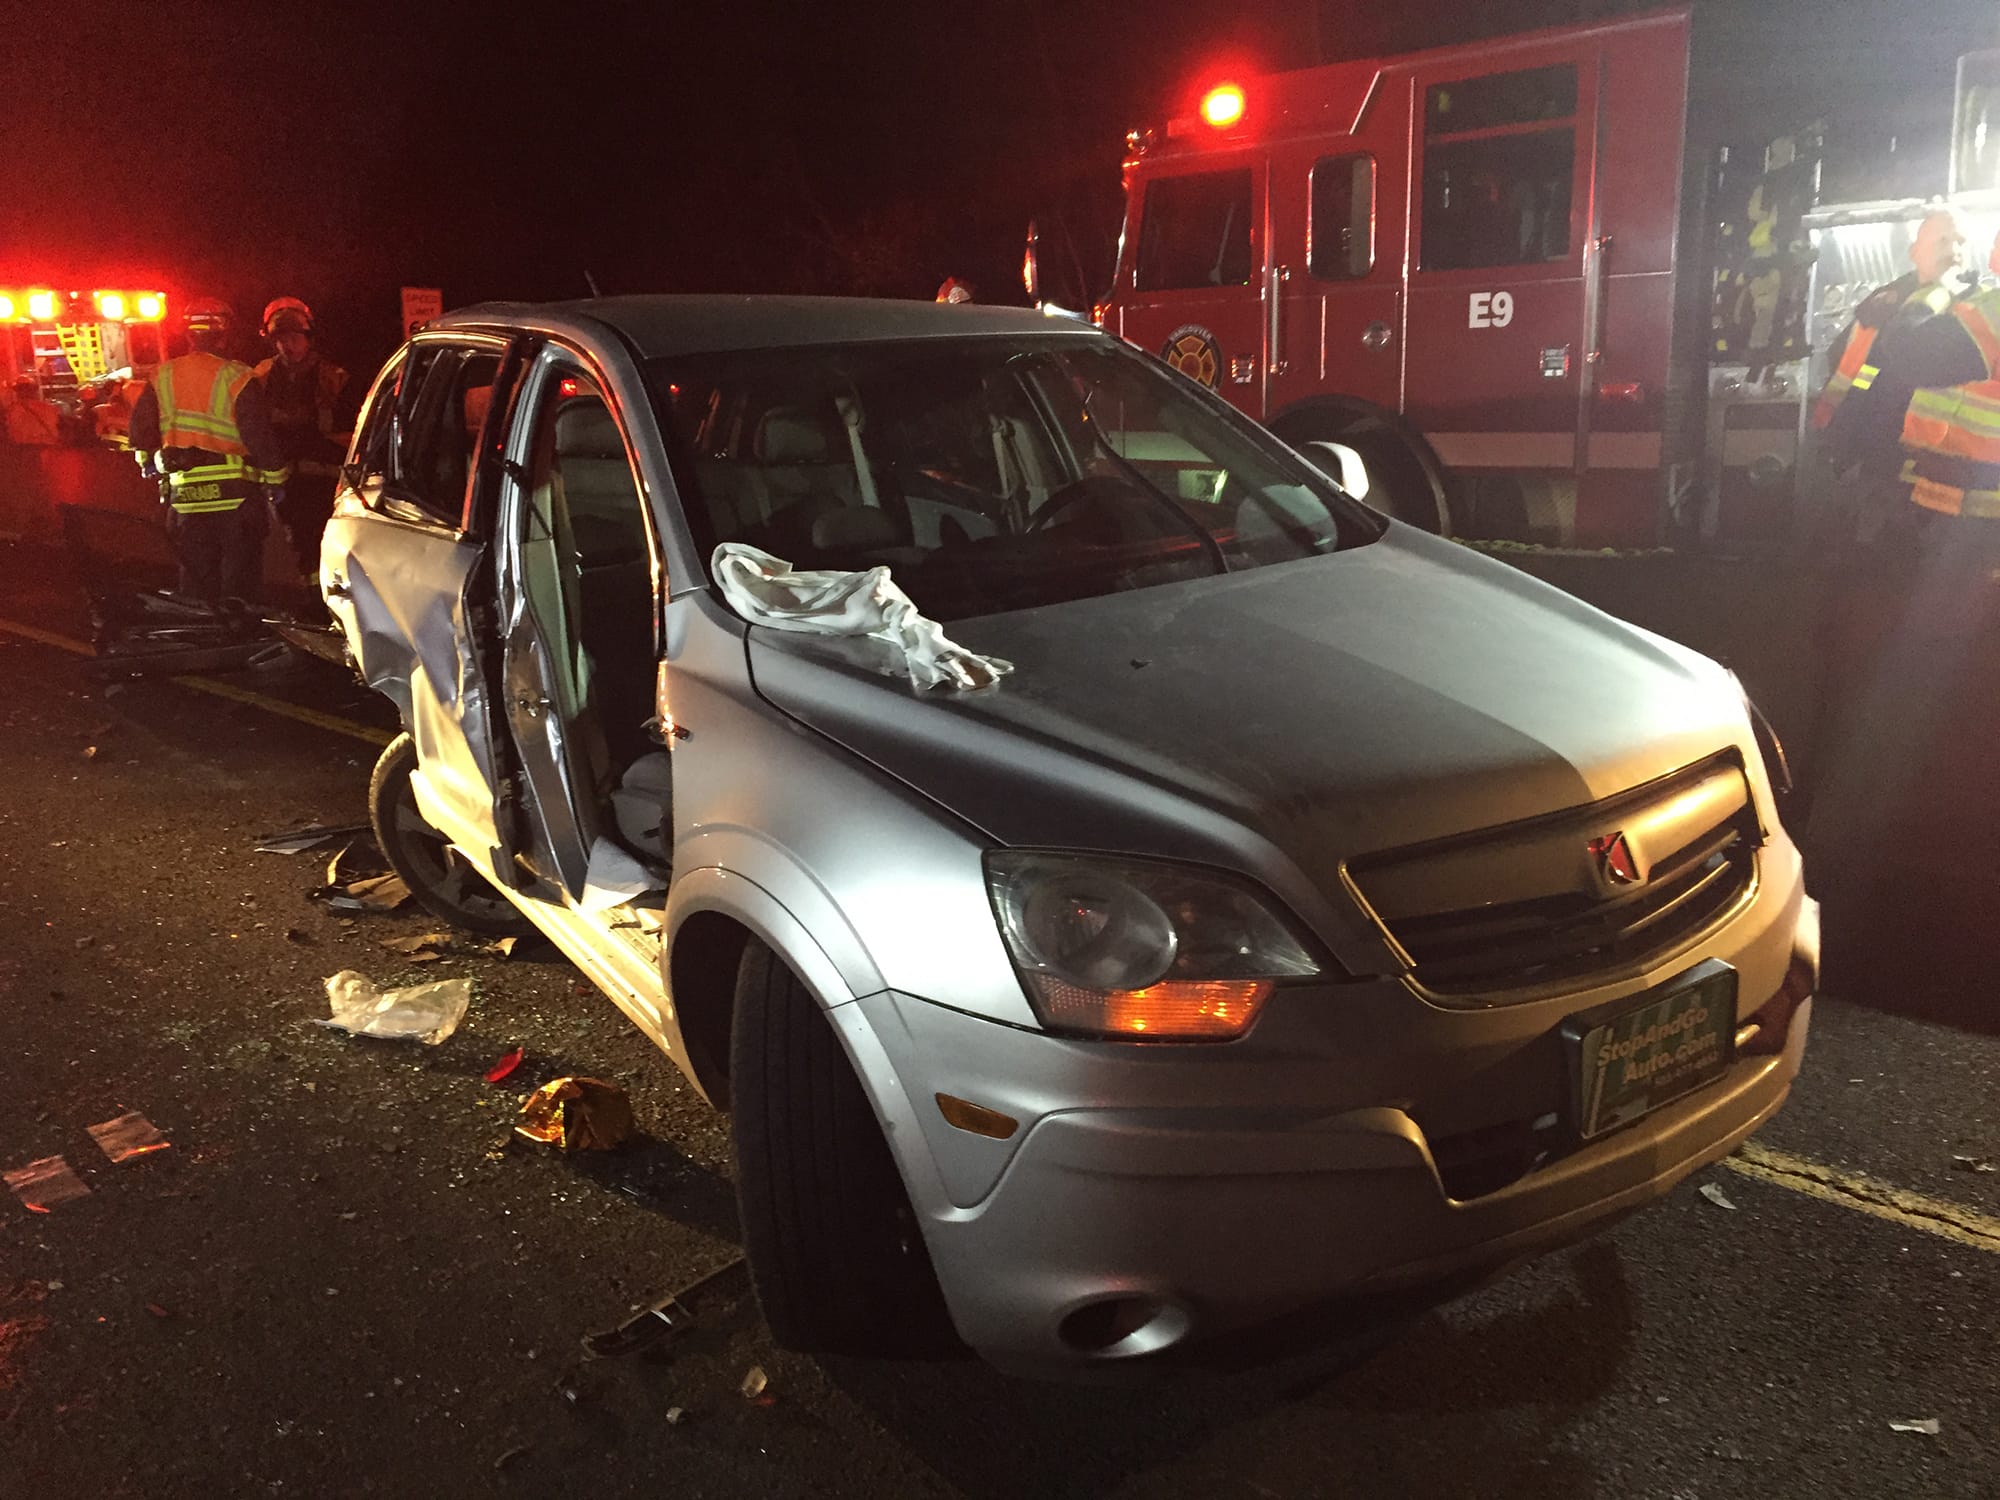 Firefighters from the Vancouver Fire Department and Clark County Fire District 6 respond Tuesday night to a six-vehicle crash on state Highway 14 in Vancouver. Six people were hurt but are expected to survive their injuries.